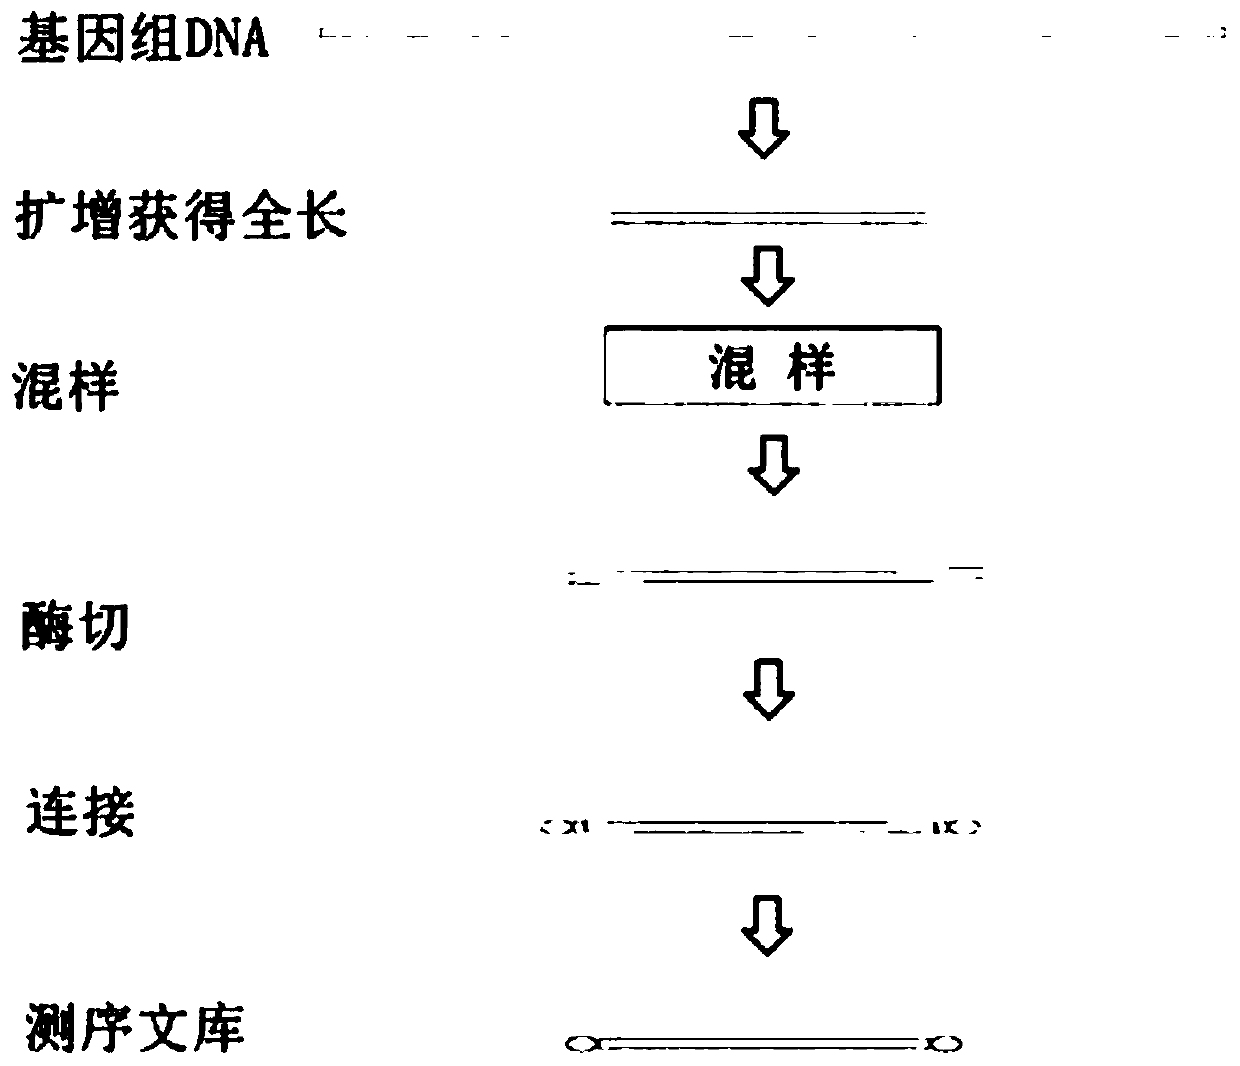 Rapid full-length amplicon library building method suitable for PacBio platform, universal primer and sequencing method